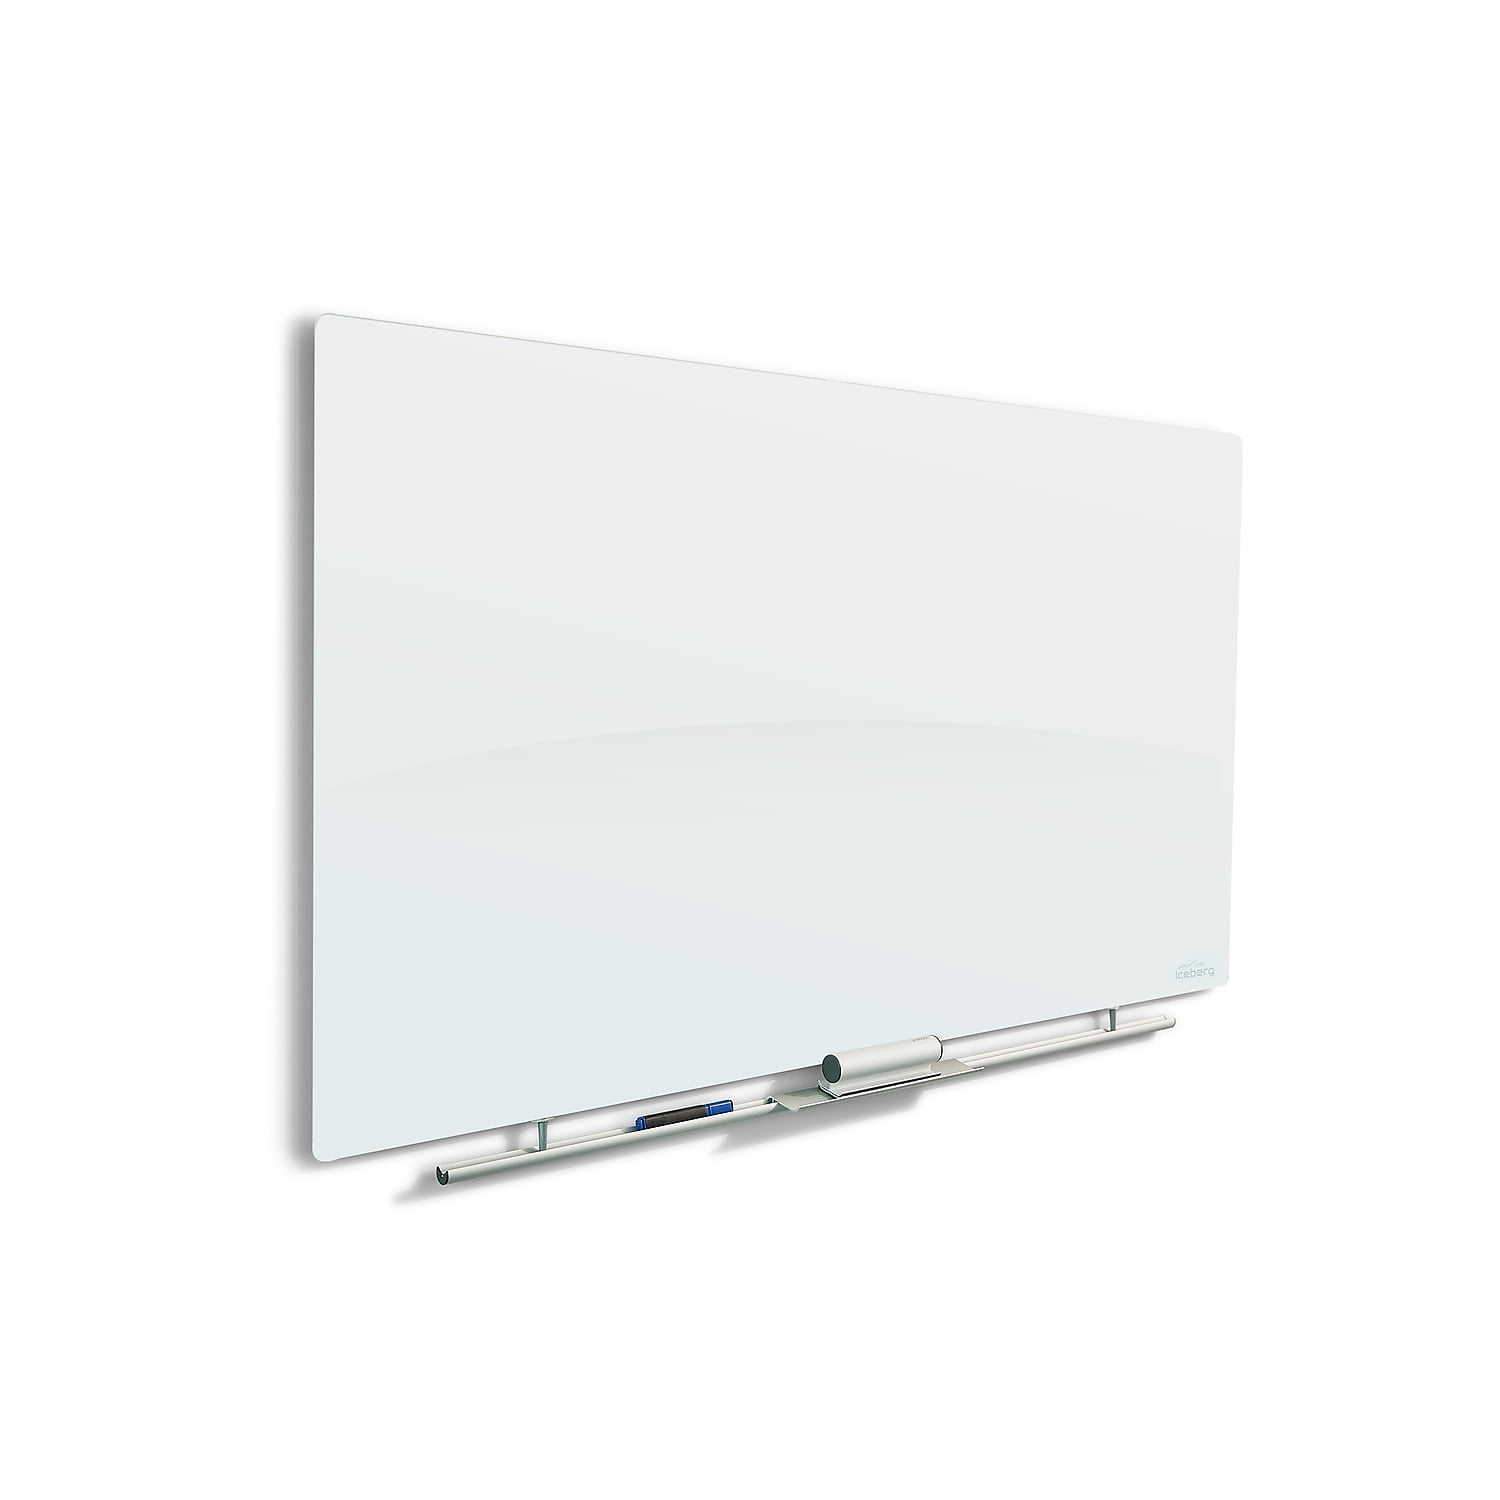 Iceberg 31193 36 X 62 In. Clarity Magnetic Glass Dry Erase Board